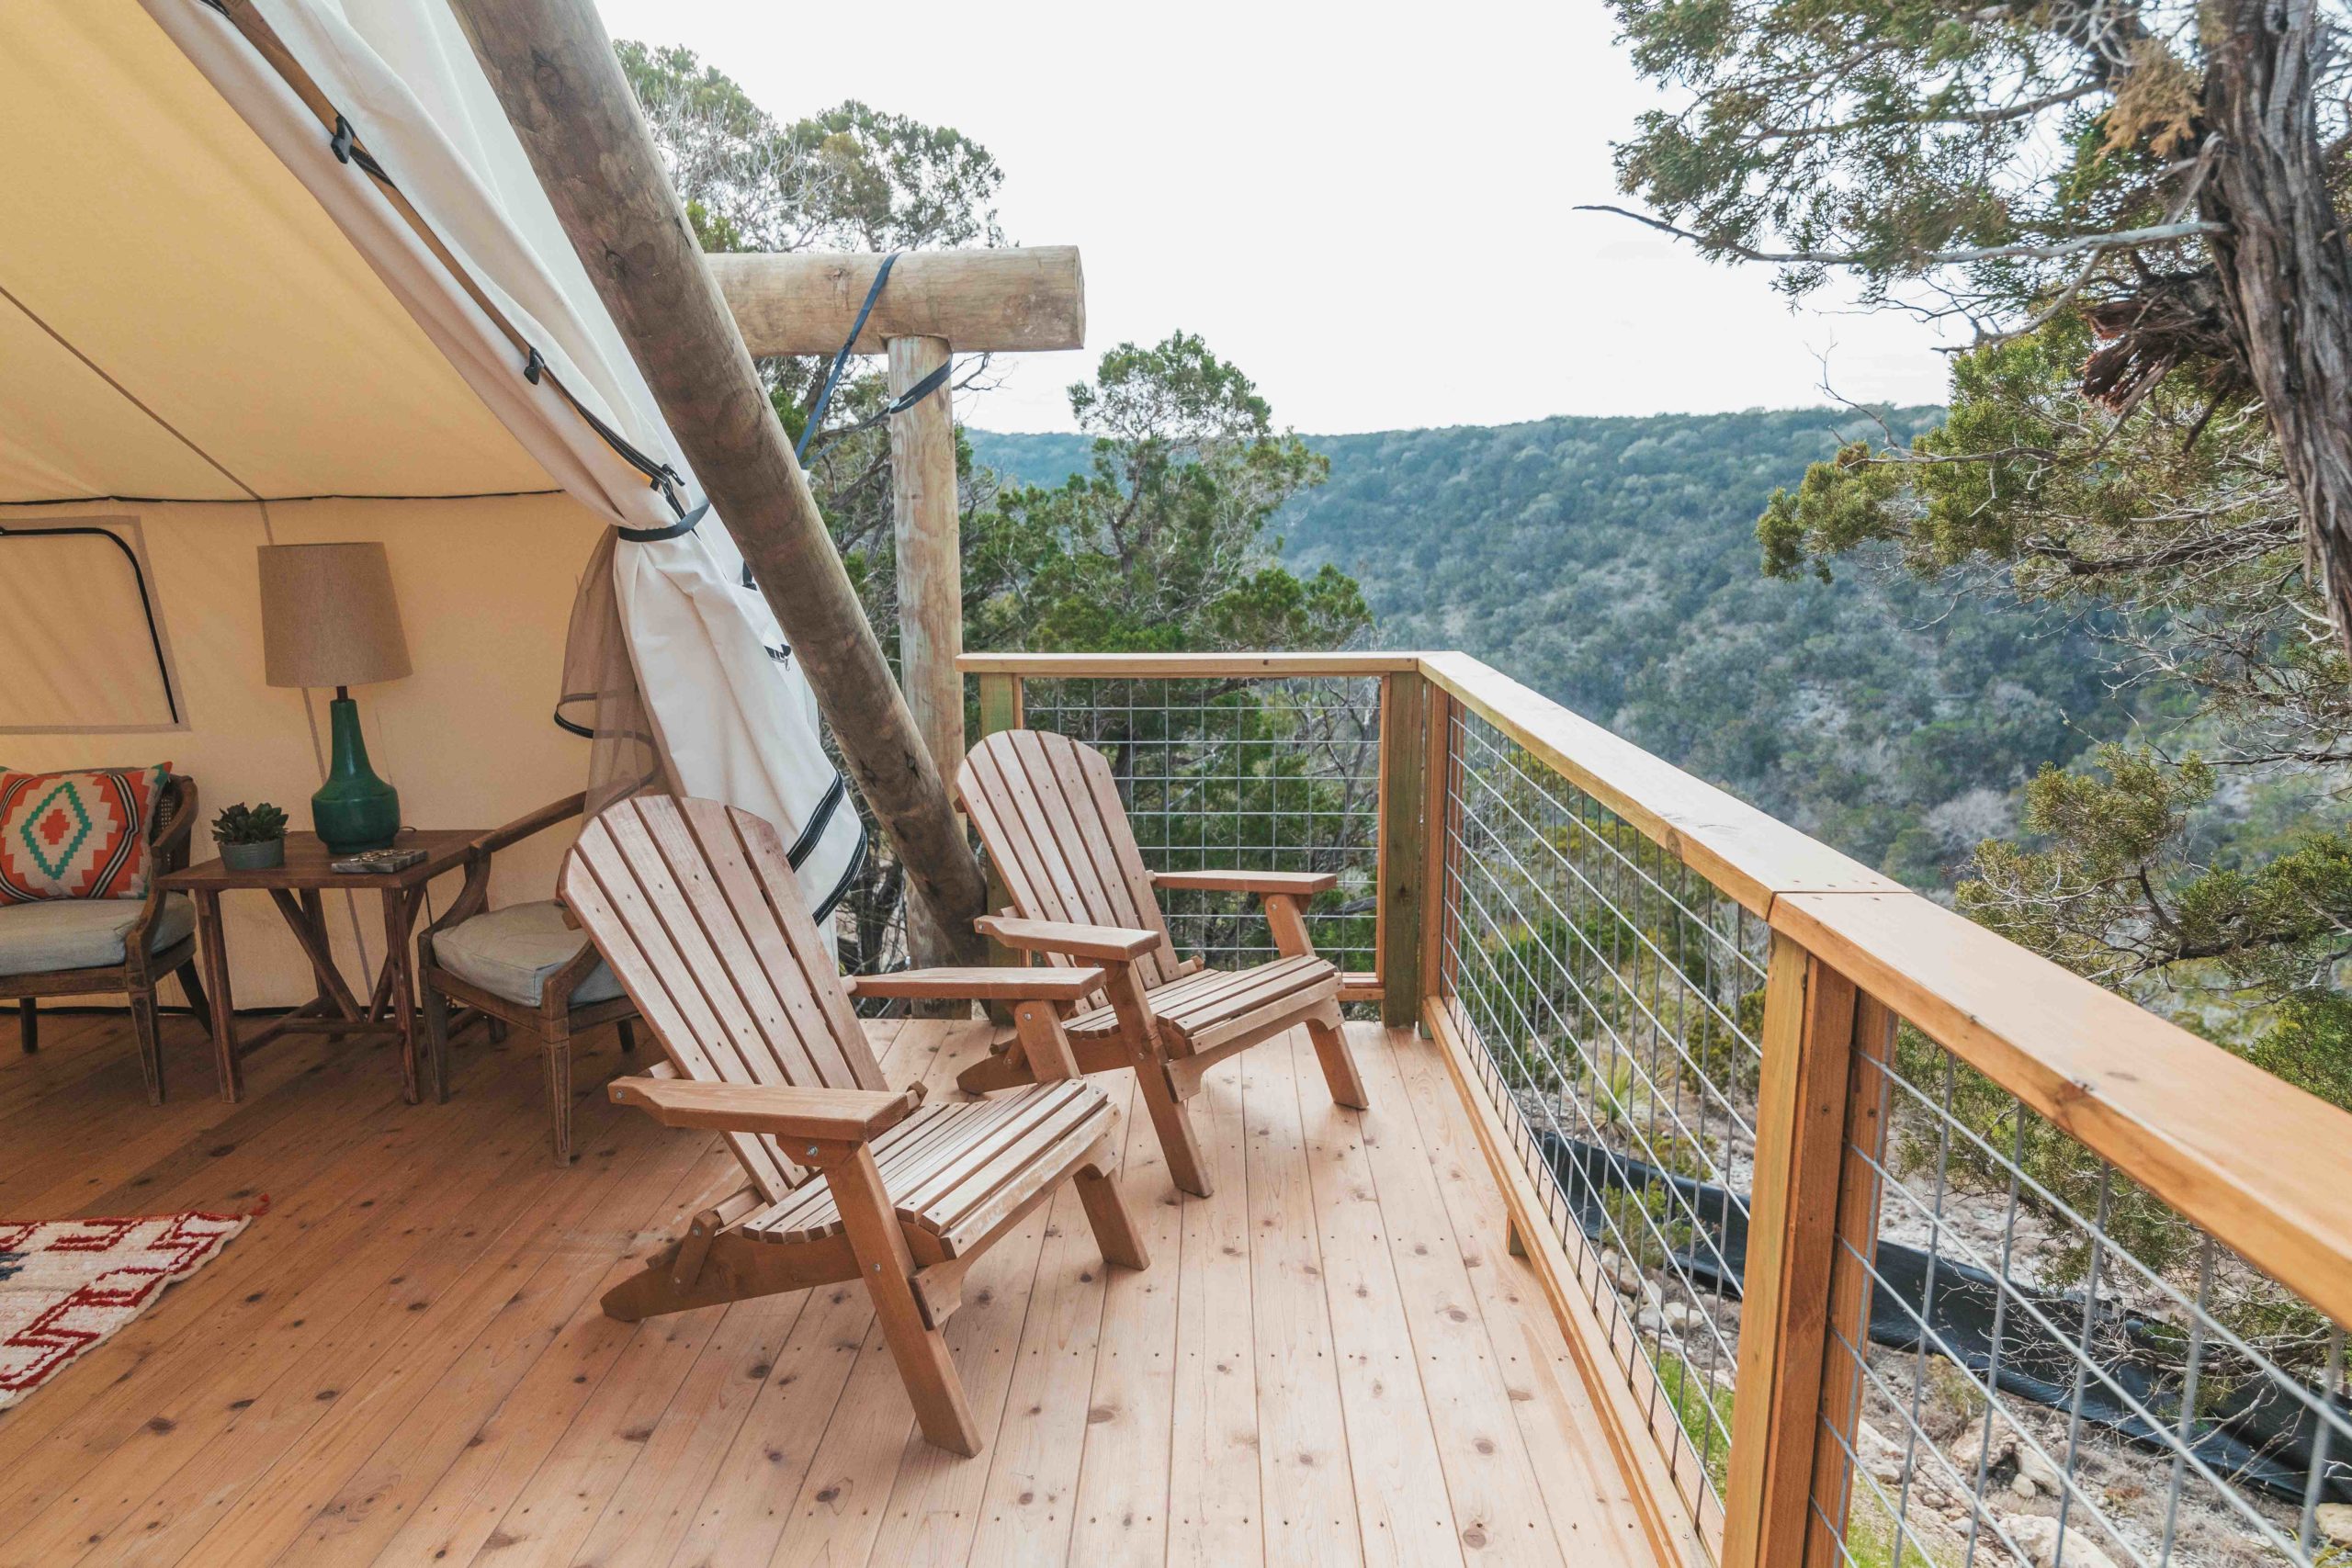 Balcony of camp with two chairs